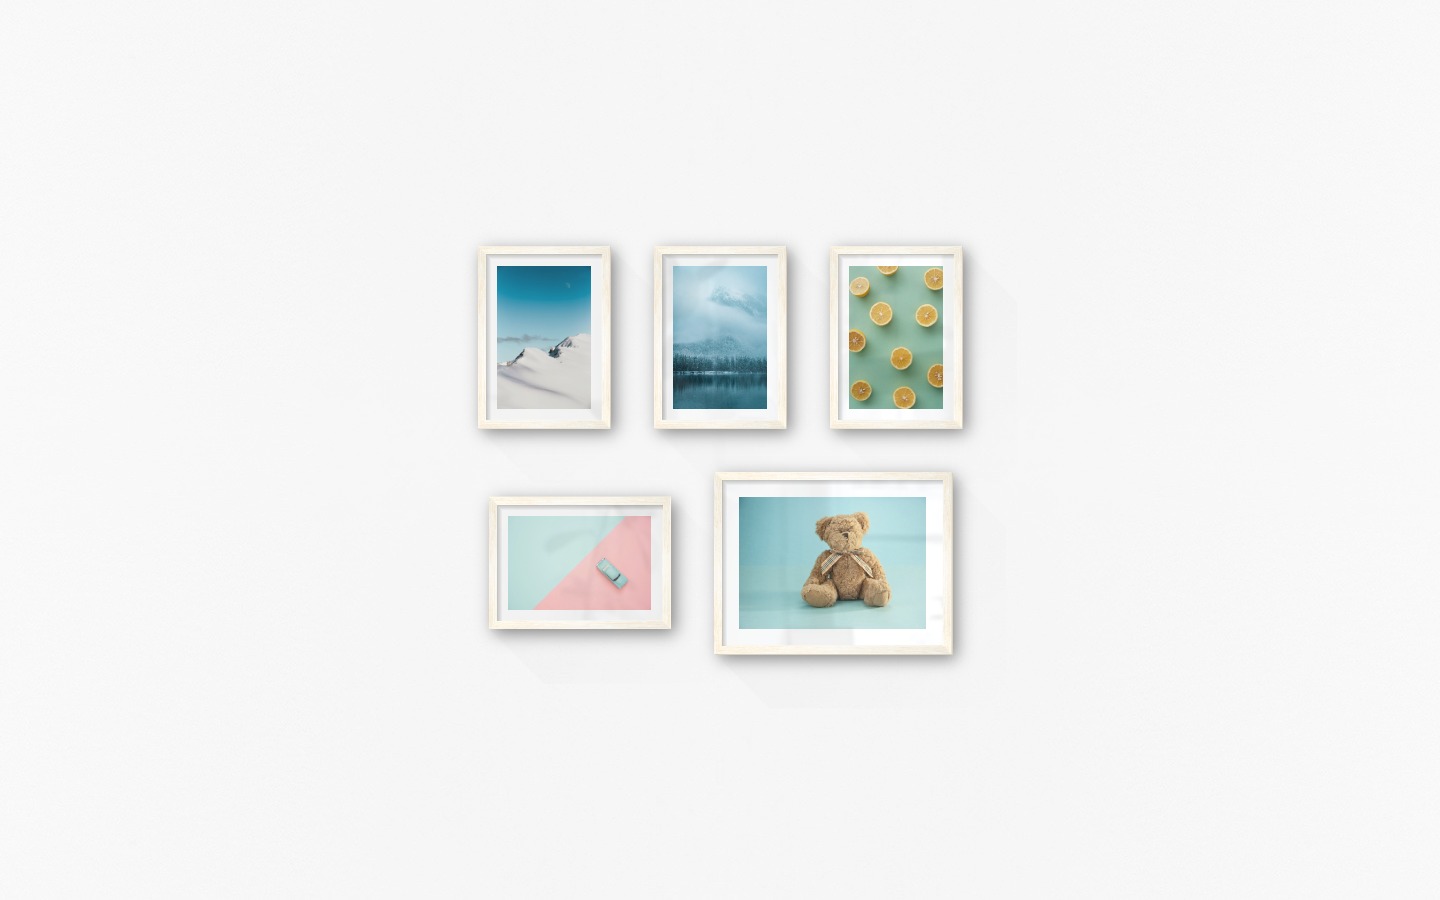 Gallery wall with picture frames in light wood in sizes 21x30 and 30x40 with prints "Snowy mountain peaks", "Lake, mountains and forest", "Lemons", "Blue car and pink" and "Teddy bear and blue"